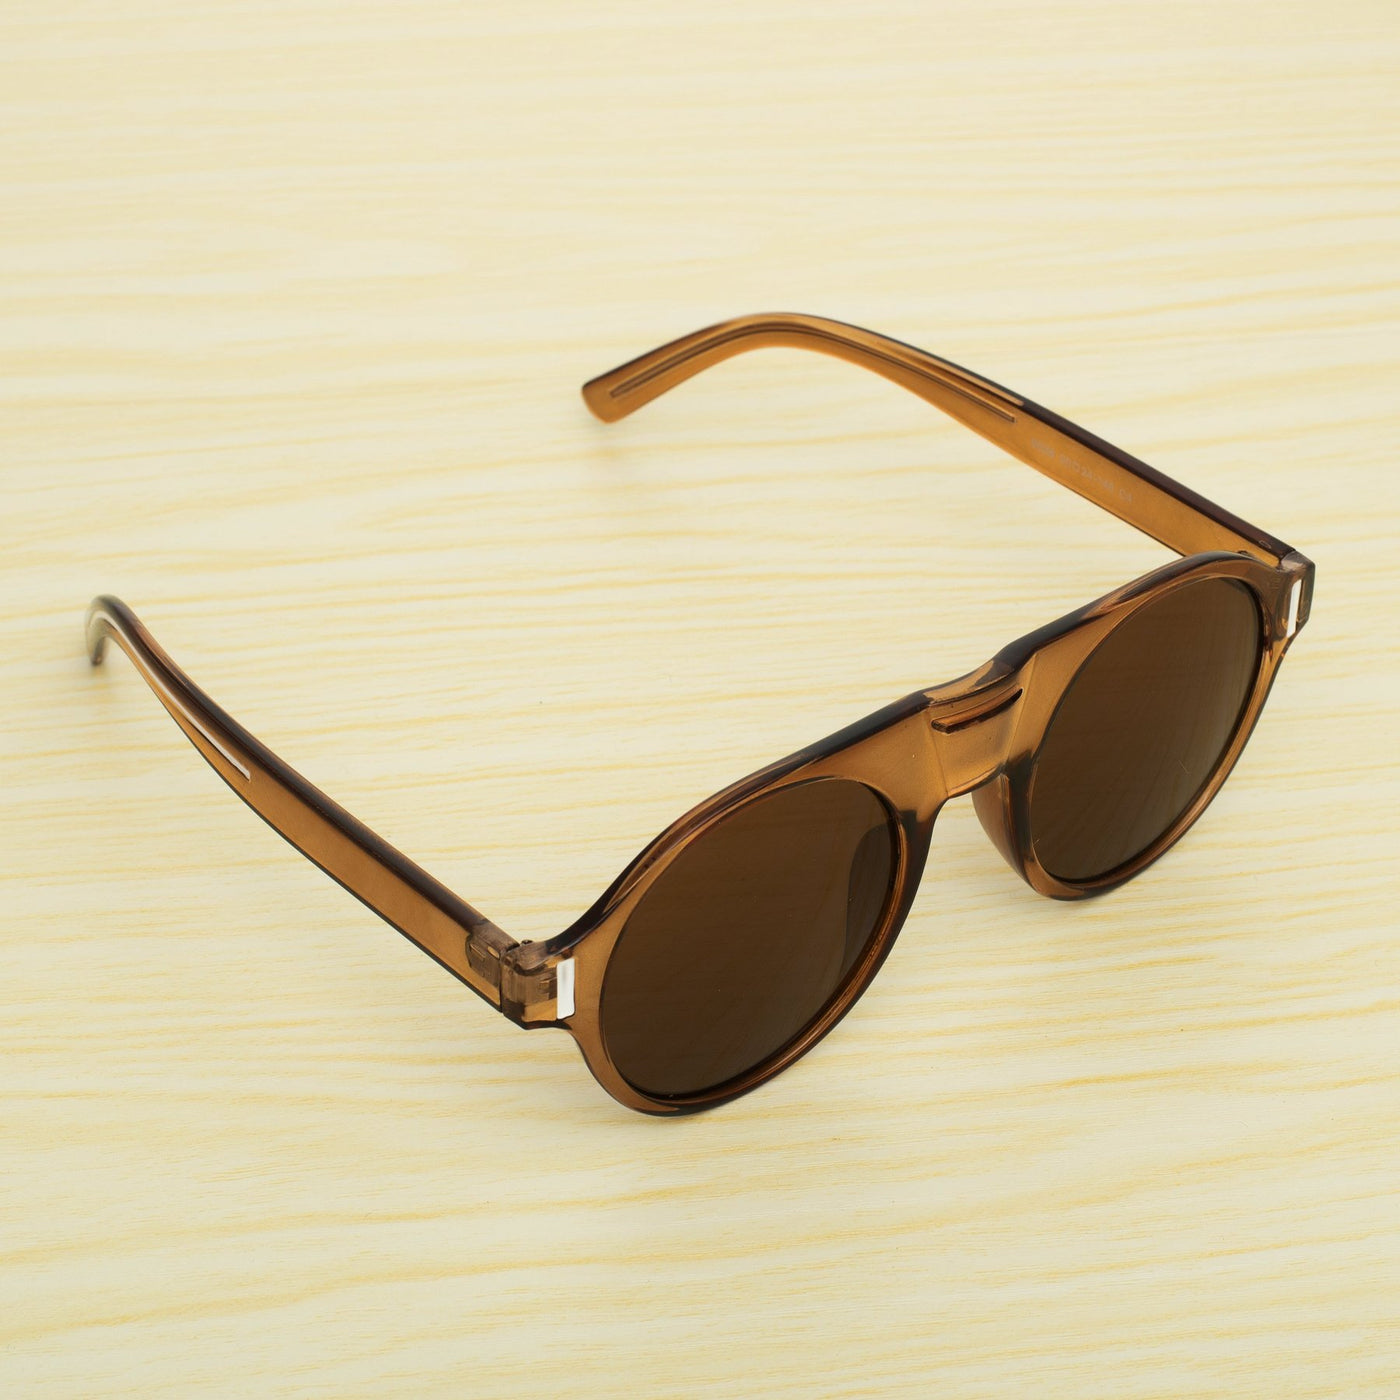 Round Brown And Coper Gold Sunglasses For Men And Women-Unique and Classy